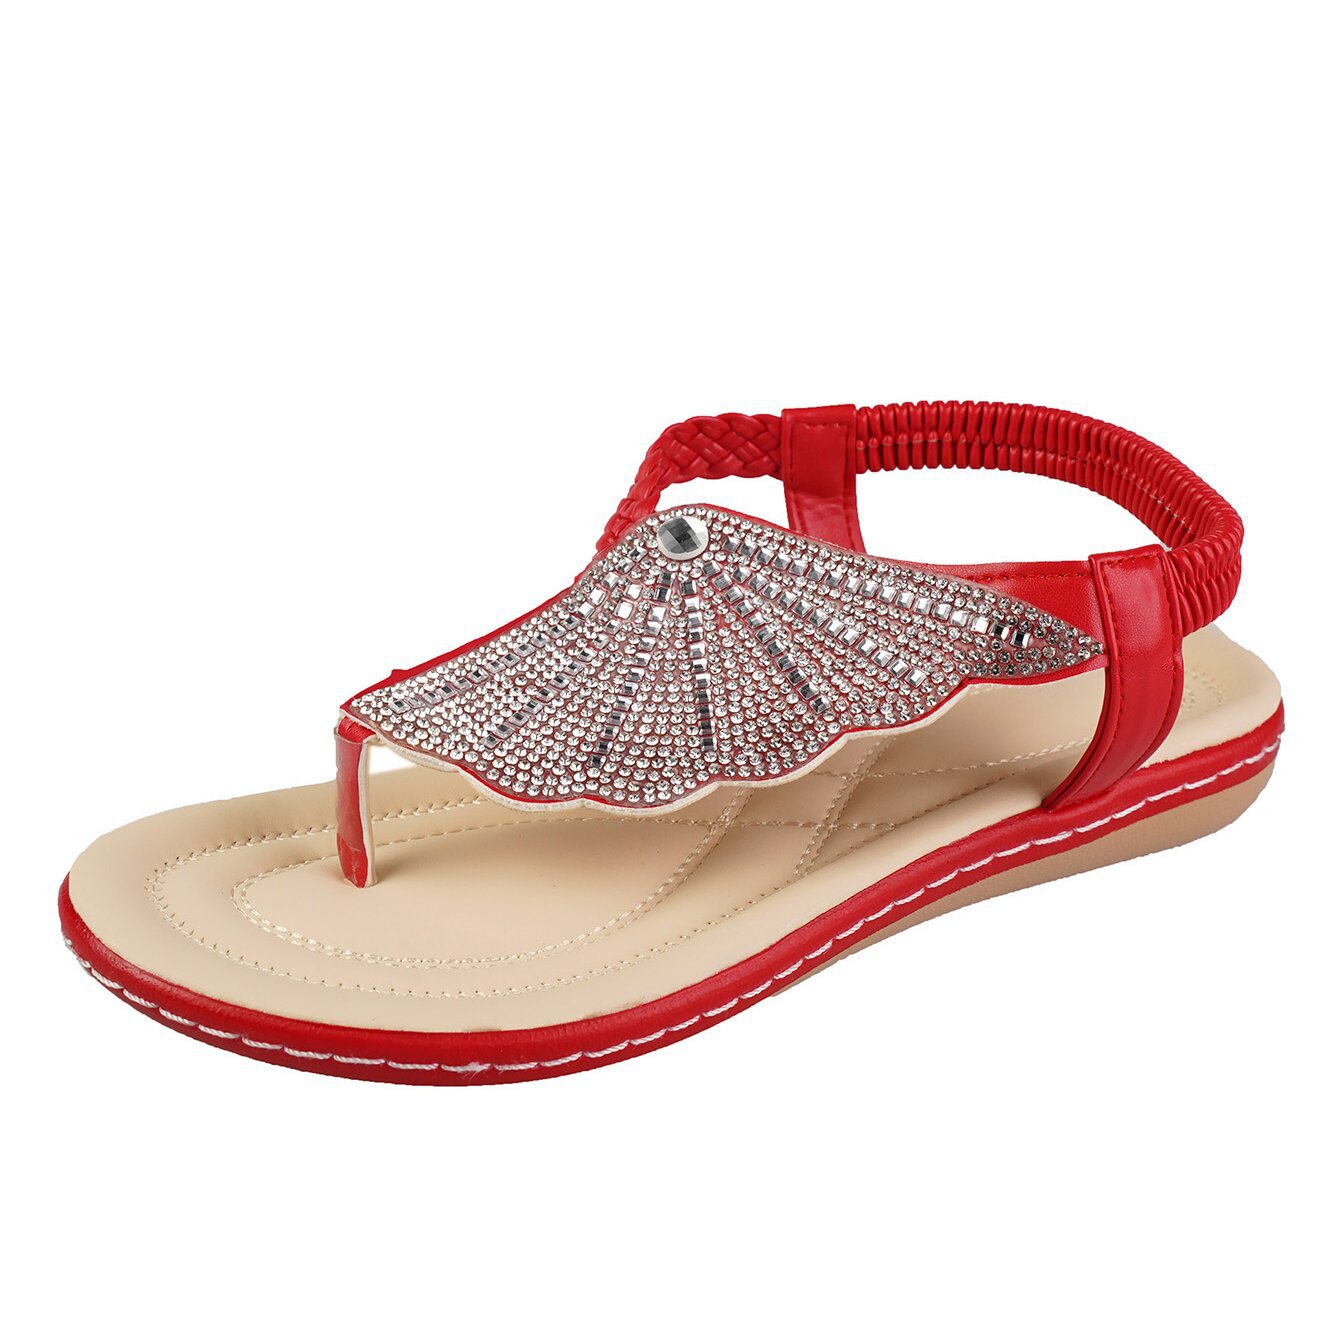 Rhinestone Shell Flip-Flops Sandals Summer Beach Shoes For Women Fashion Casual Low Heel Flat Slides Slippers Shoes & Bags